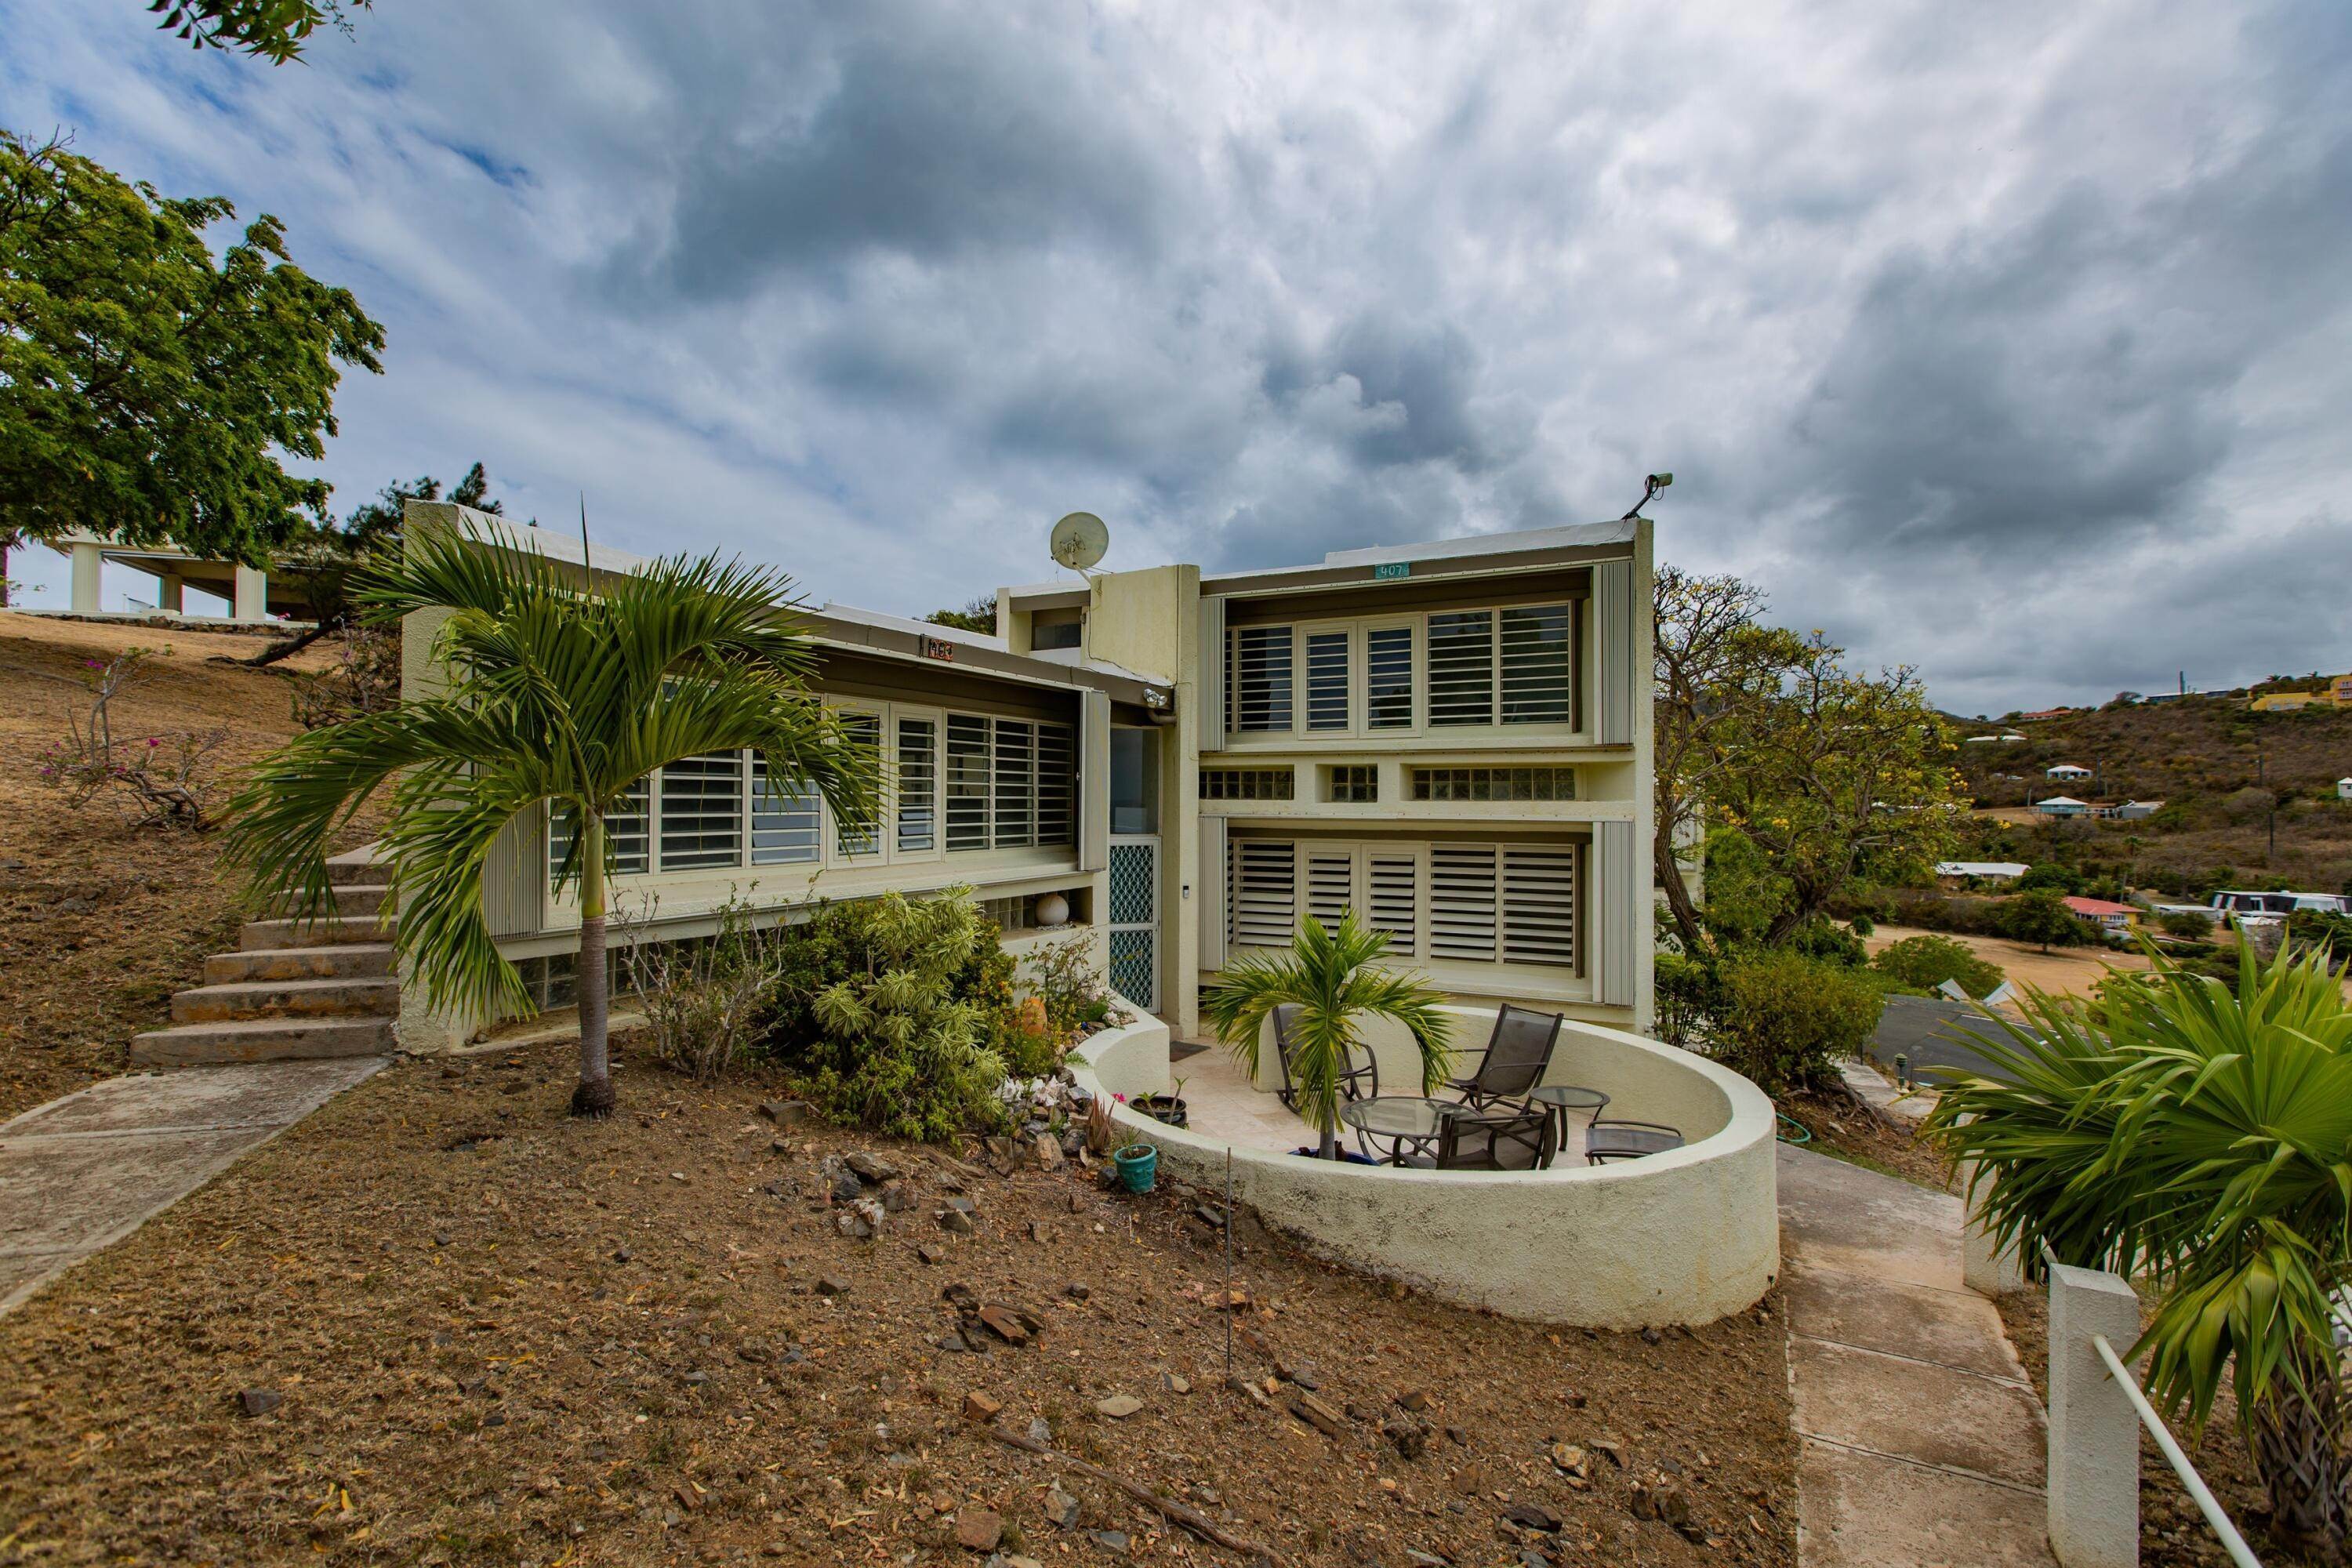 18. Condominiums for Sale at 407 Teagues Bay EB St Croix, Virgin Islands 00820 United States Virgin Islands